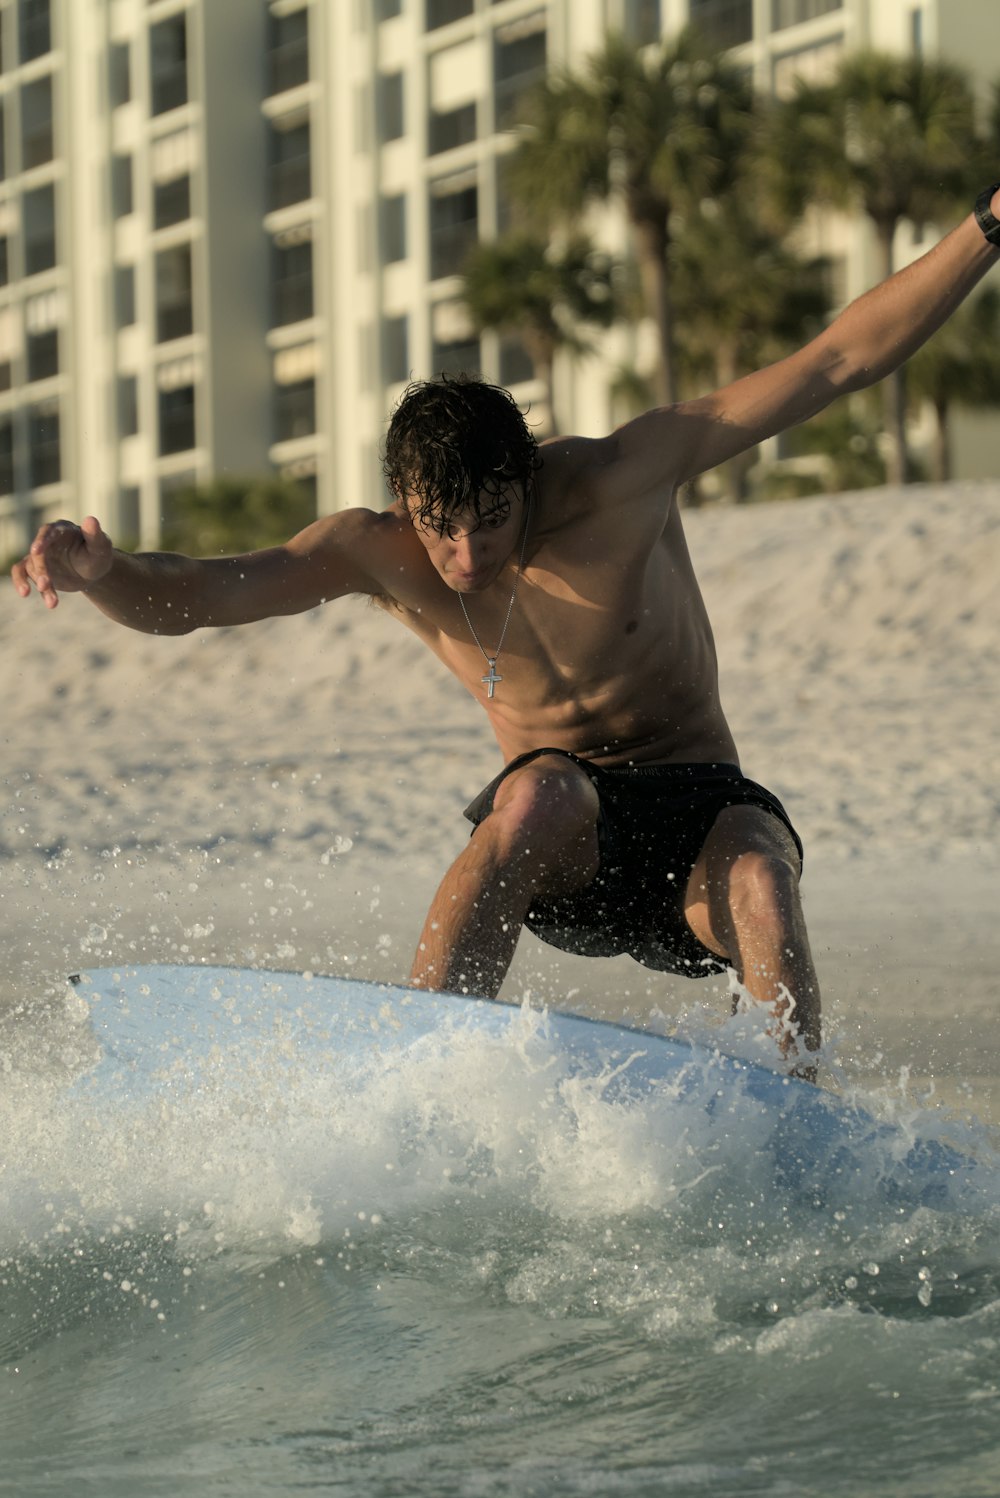 a man riding a surfboard on top of a wave